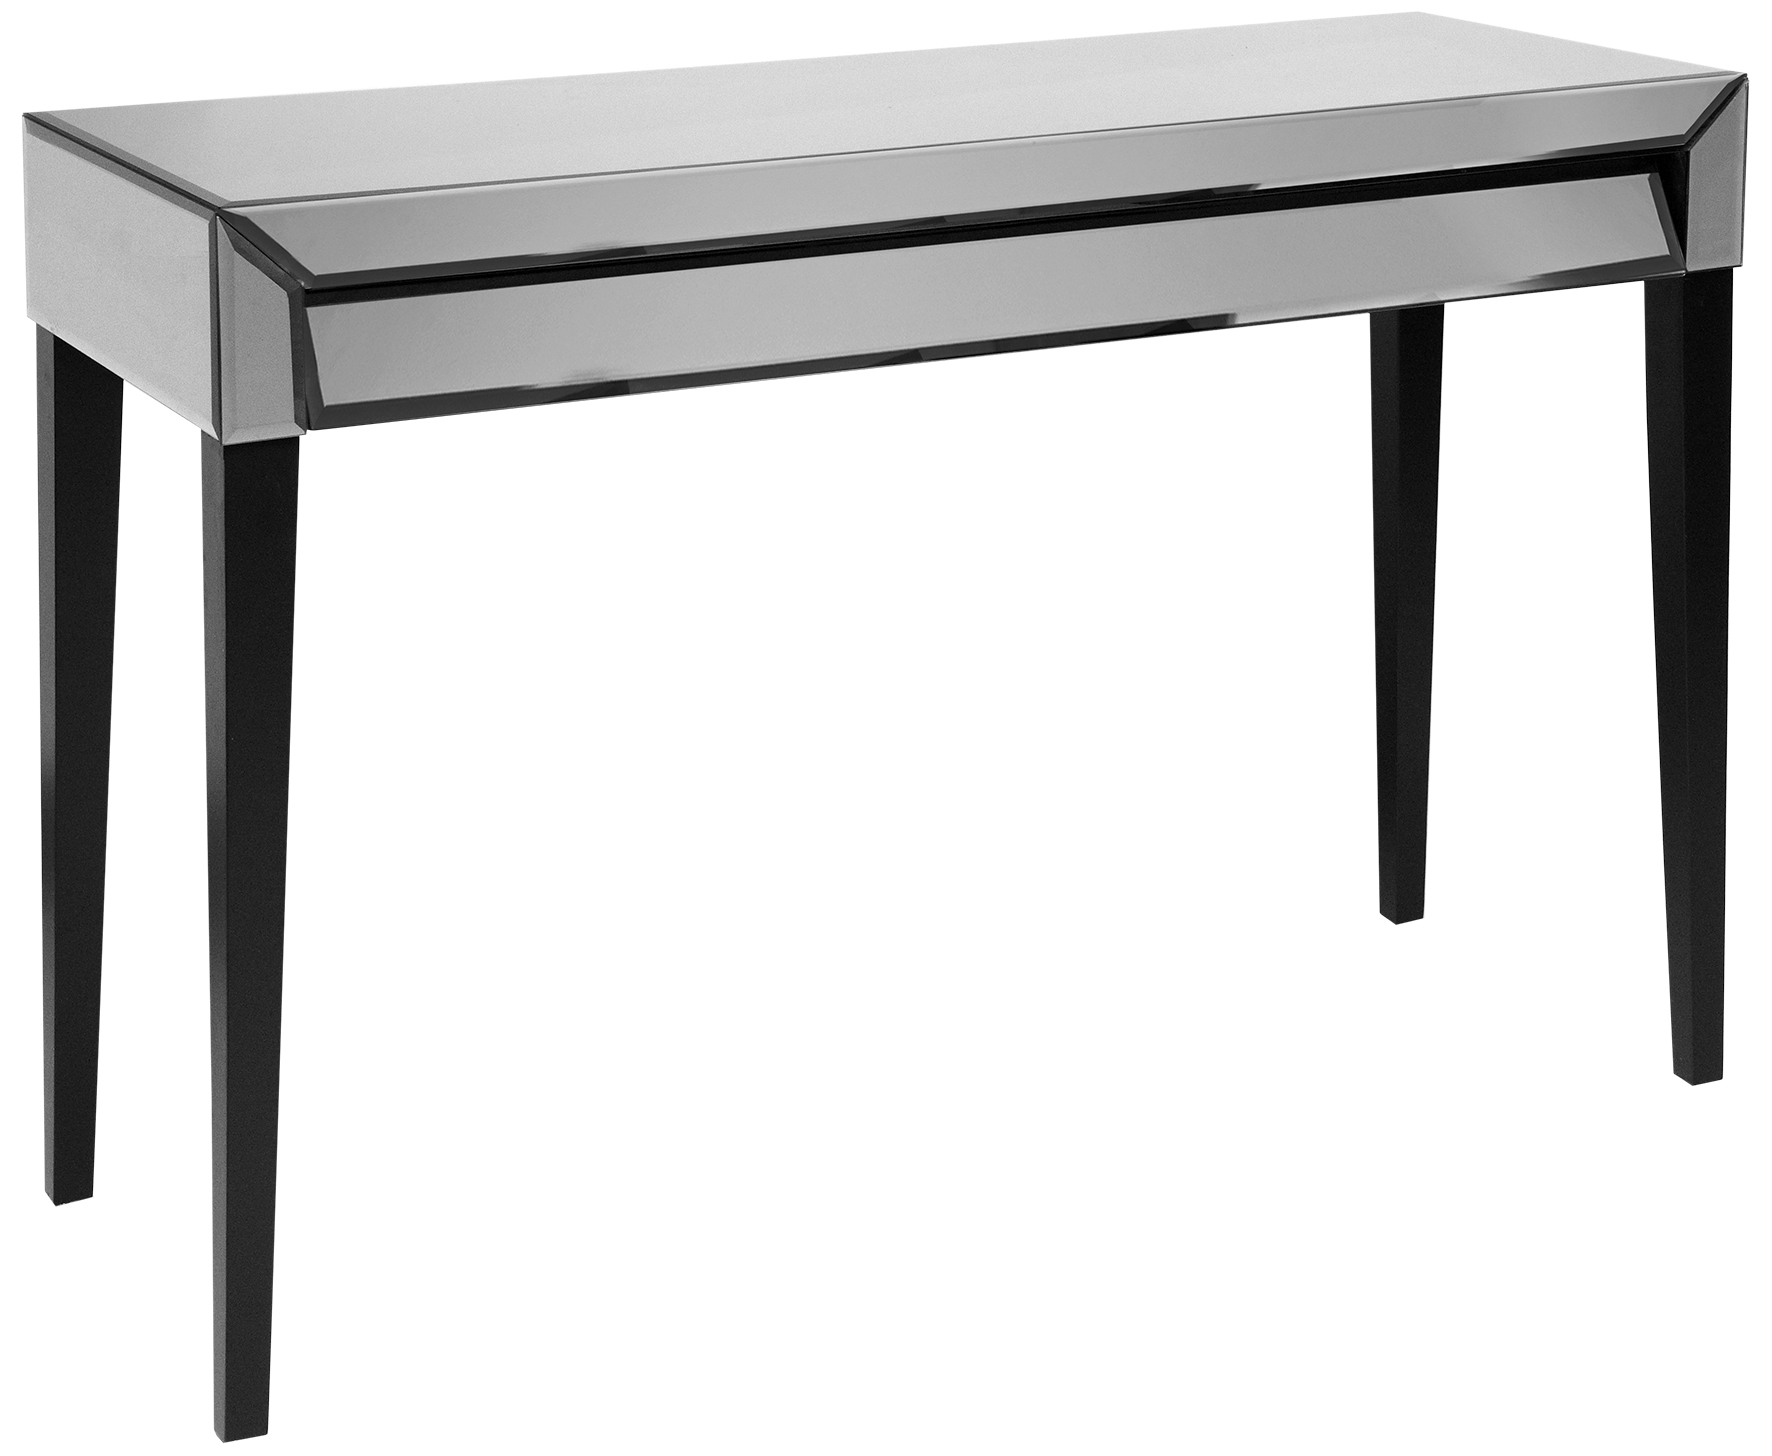 Find 90+ Captivating console table for viewing from kitchen Satisfy Your Imagination